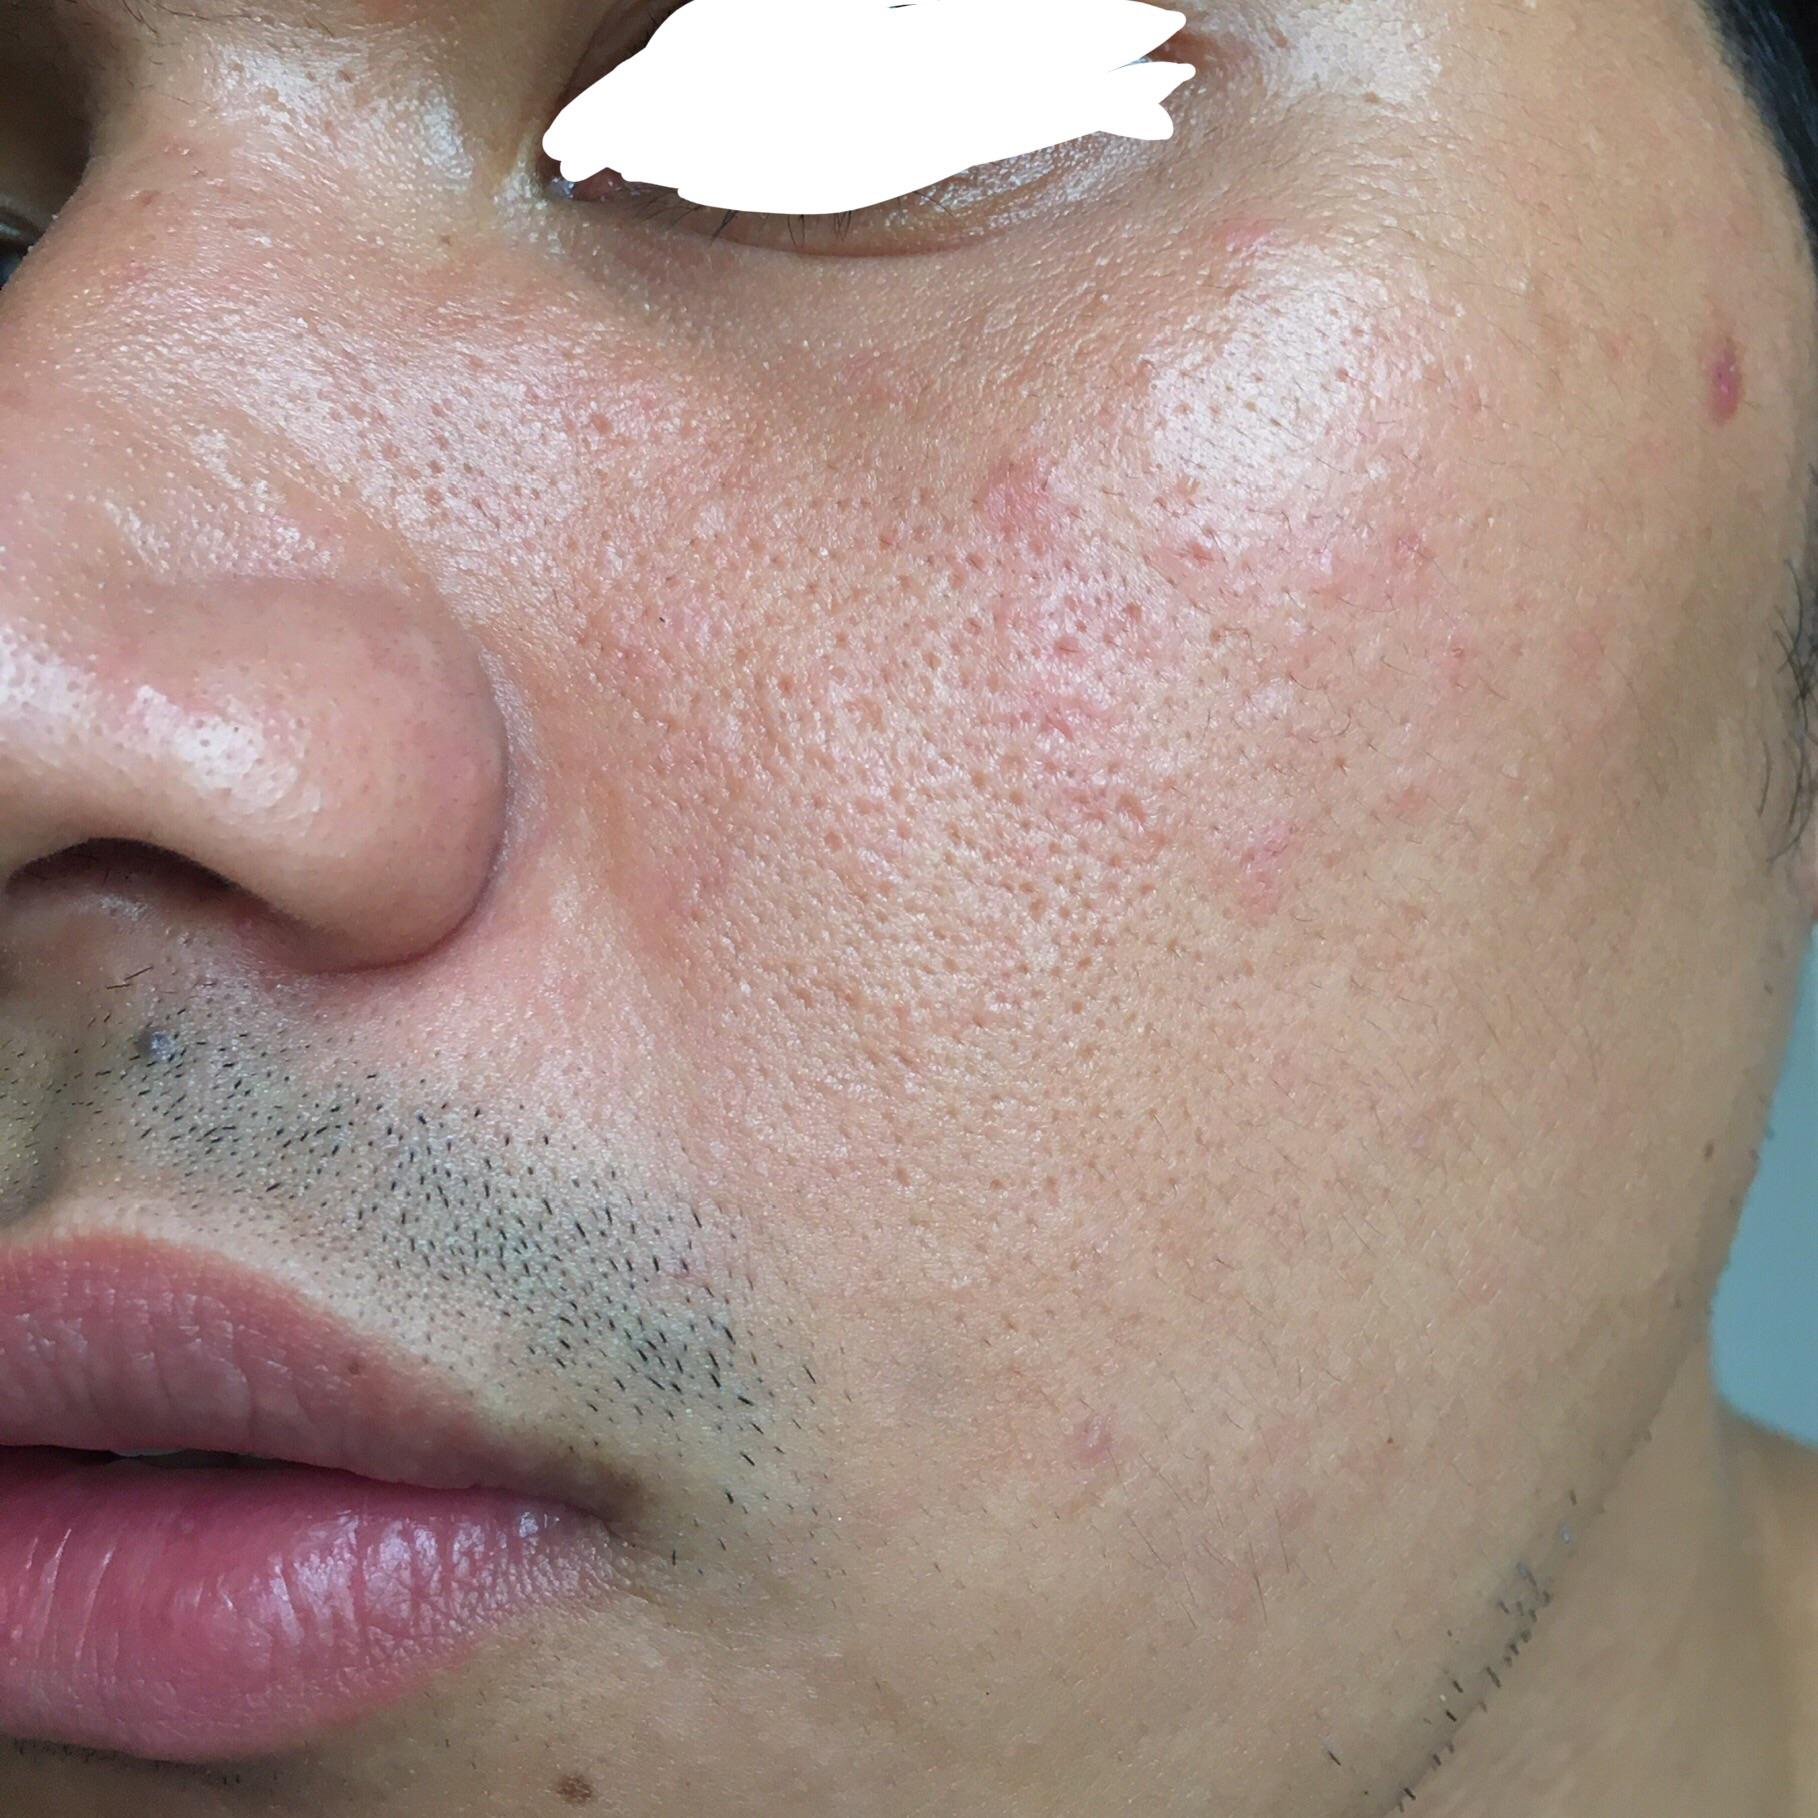 [Routine Help] Dry skin with Fungal Acne. Badly need help ...